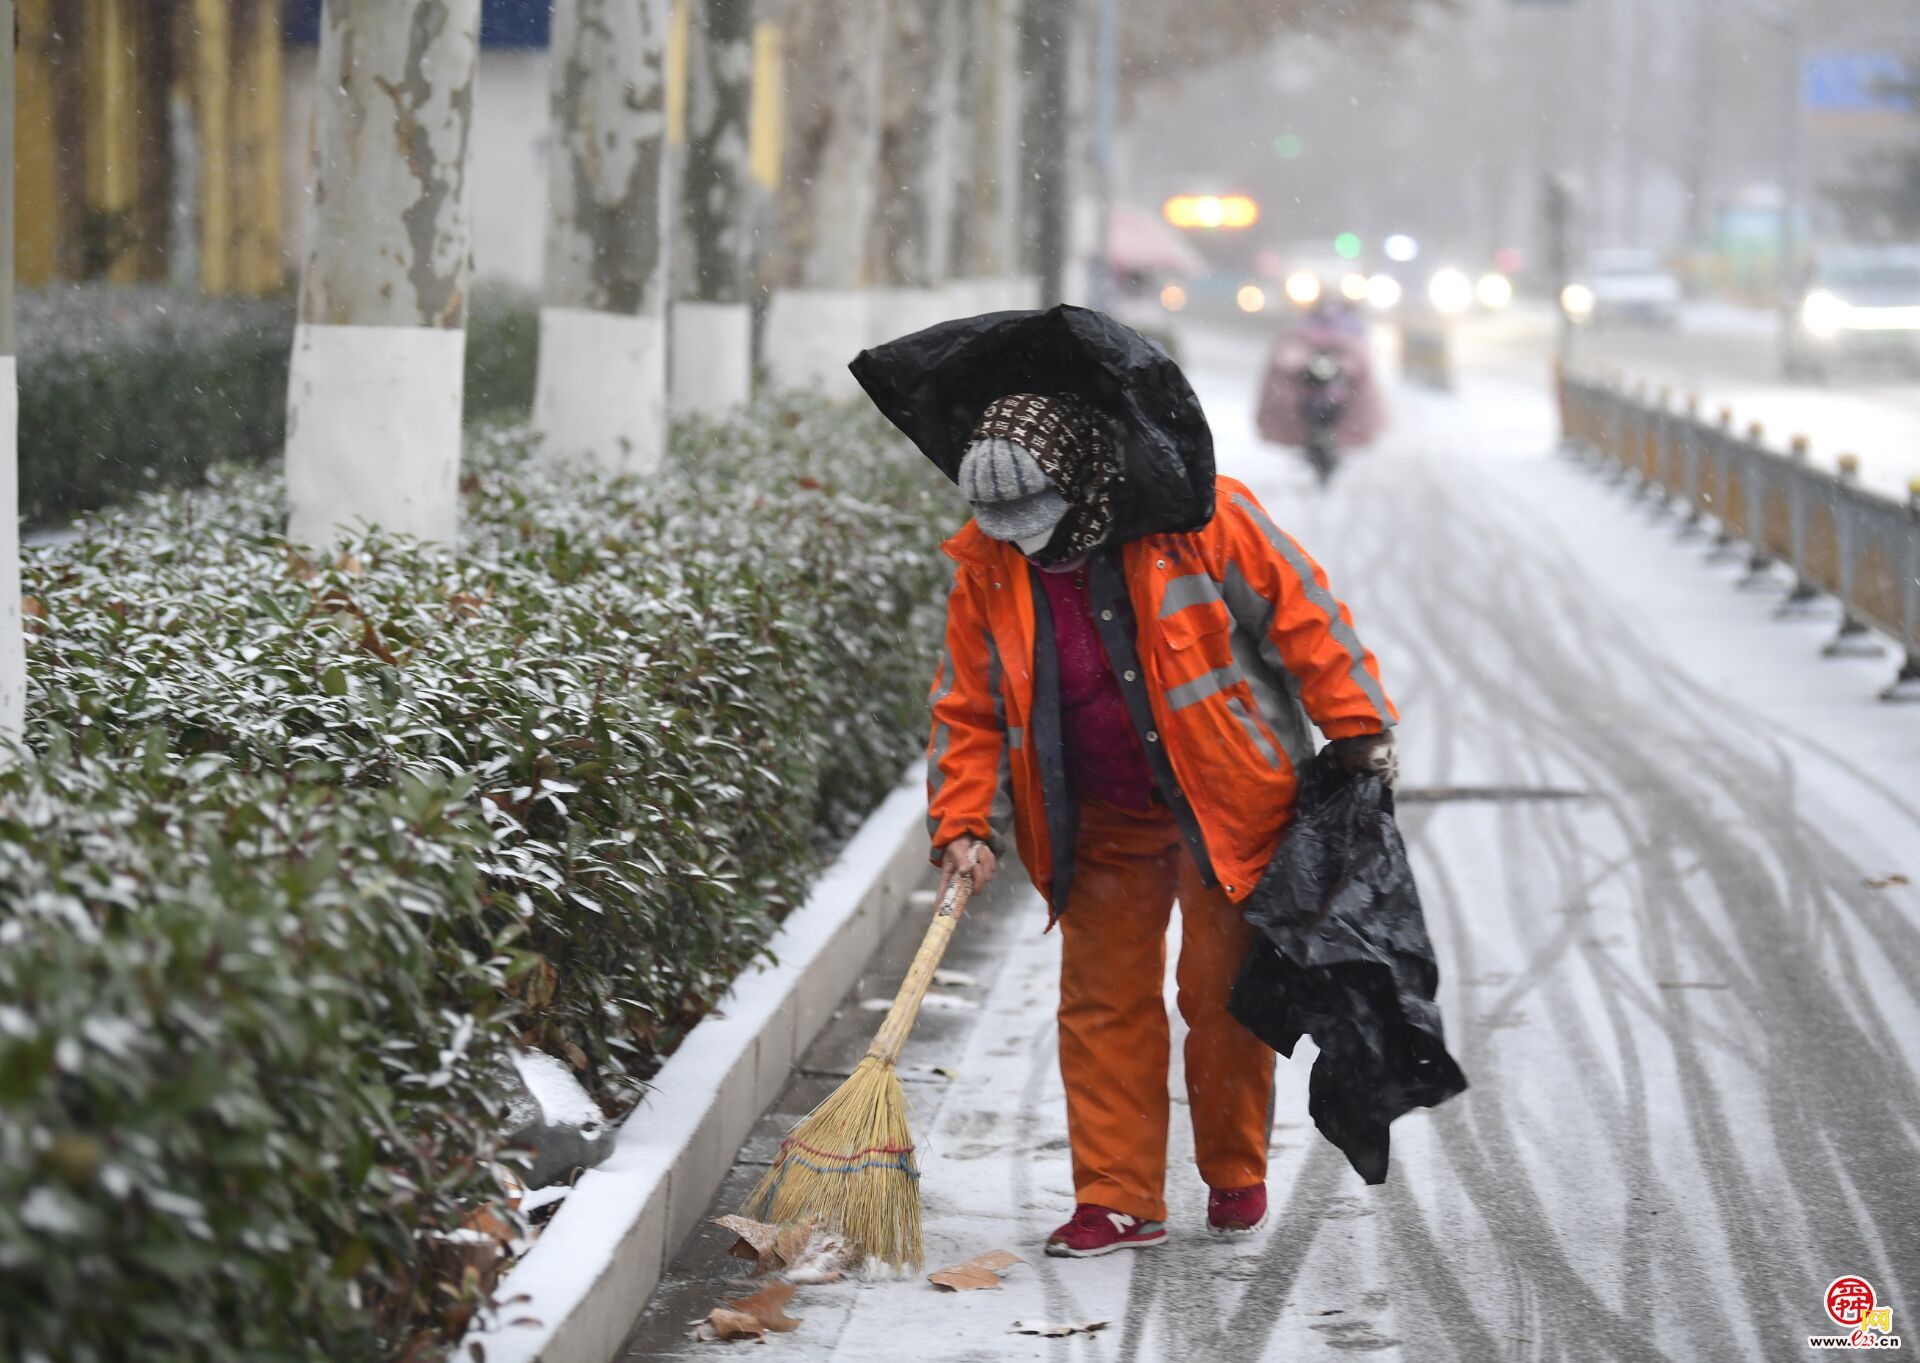 The auspicious snow heralds a good year! In the Lunar New Year, the urban area of ​​Jinan ushers in the first snow in 2023